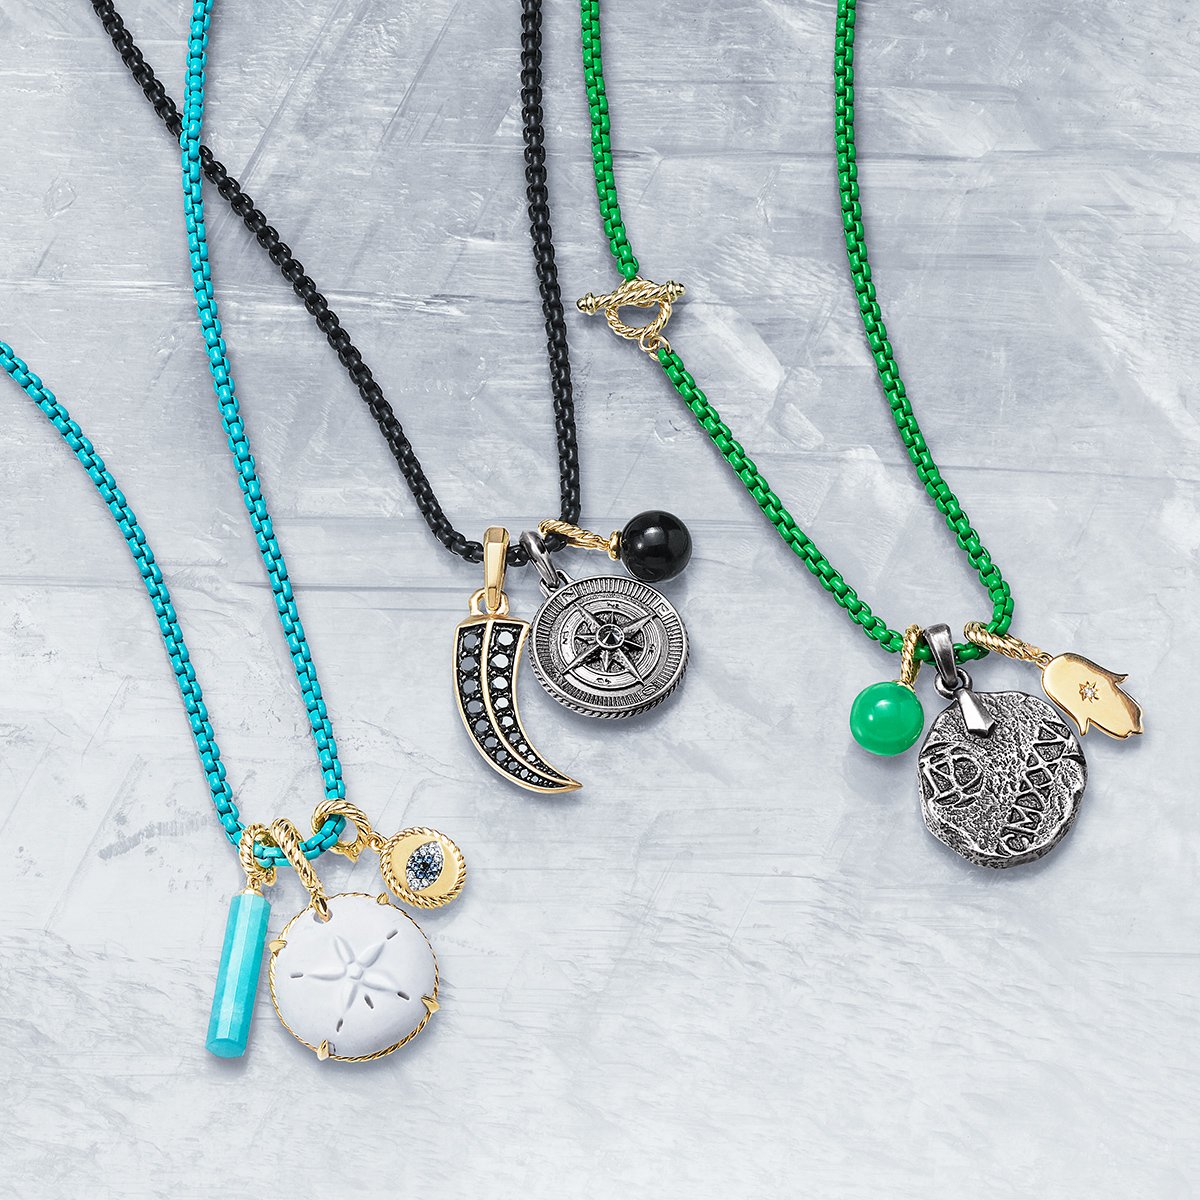 Garlands of colorful chains adorned with meaningful charms make an expressive David Yurman gift for her or him. #davidyurman #njewelers #shopforher #love #give